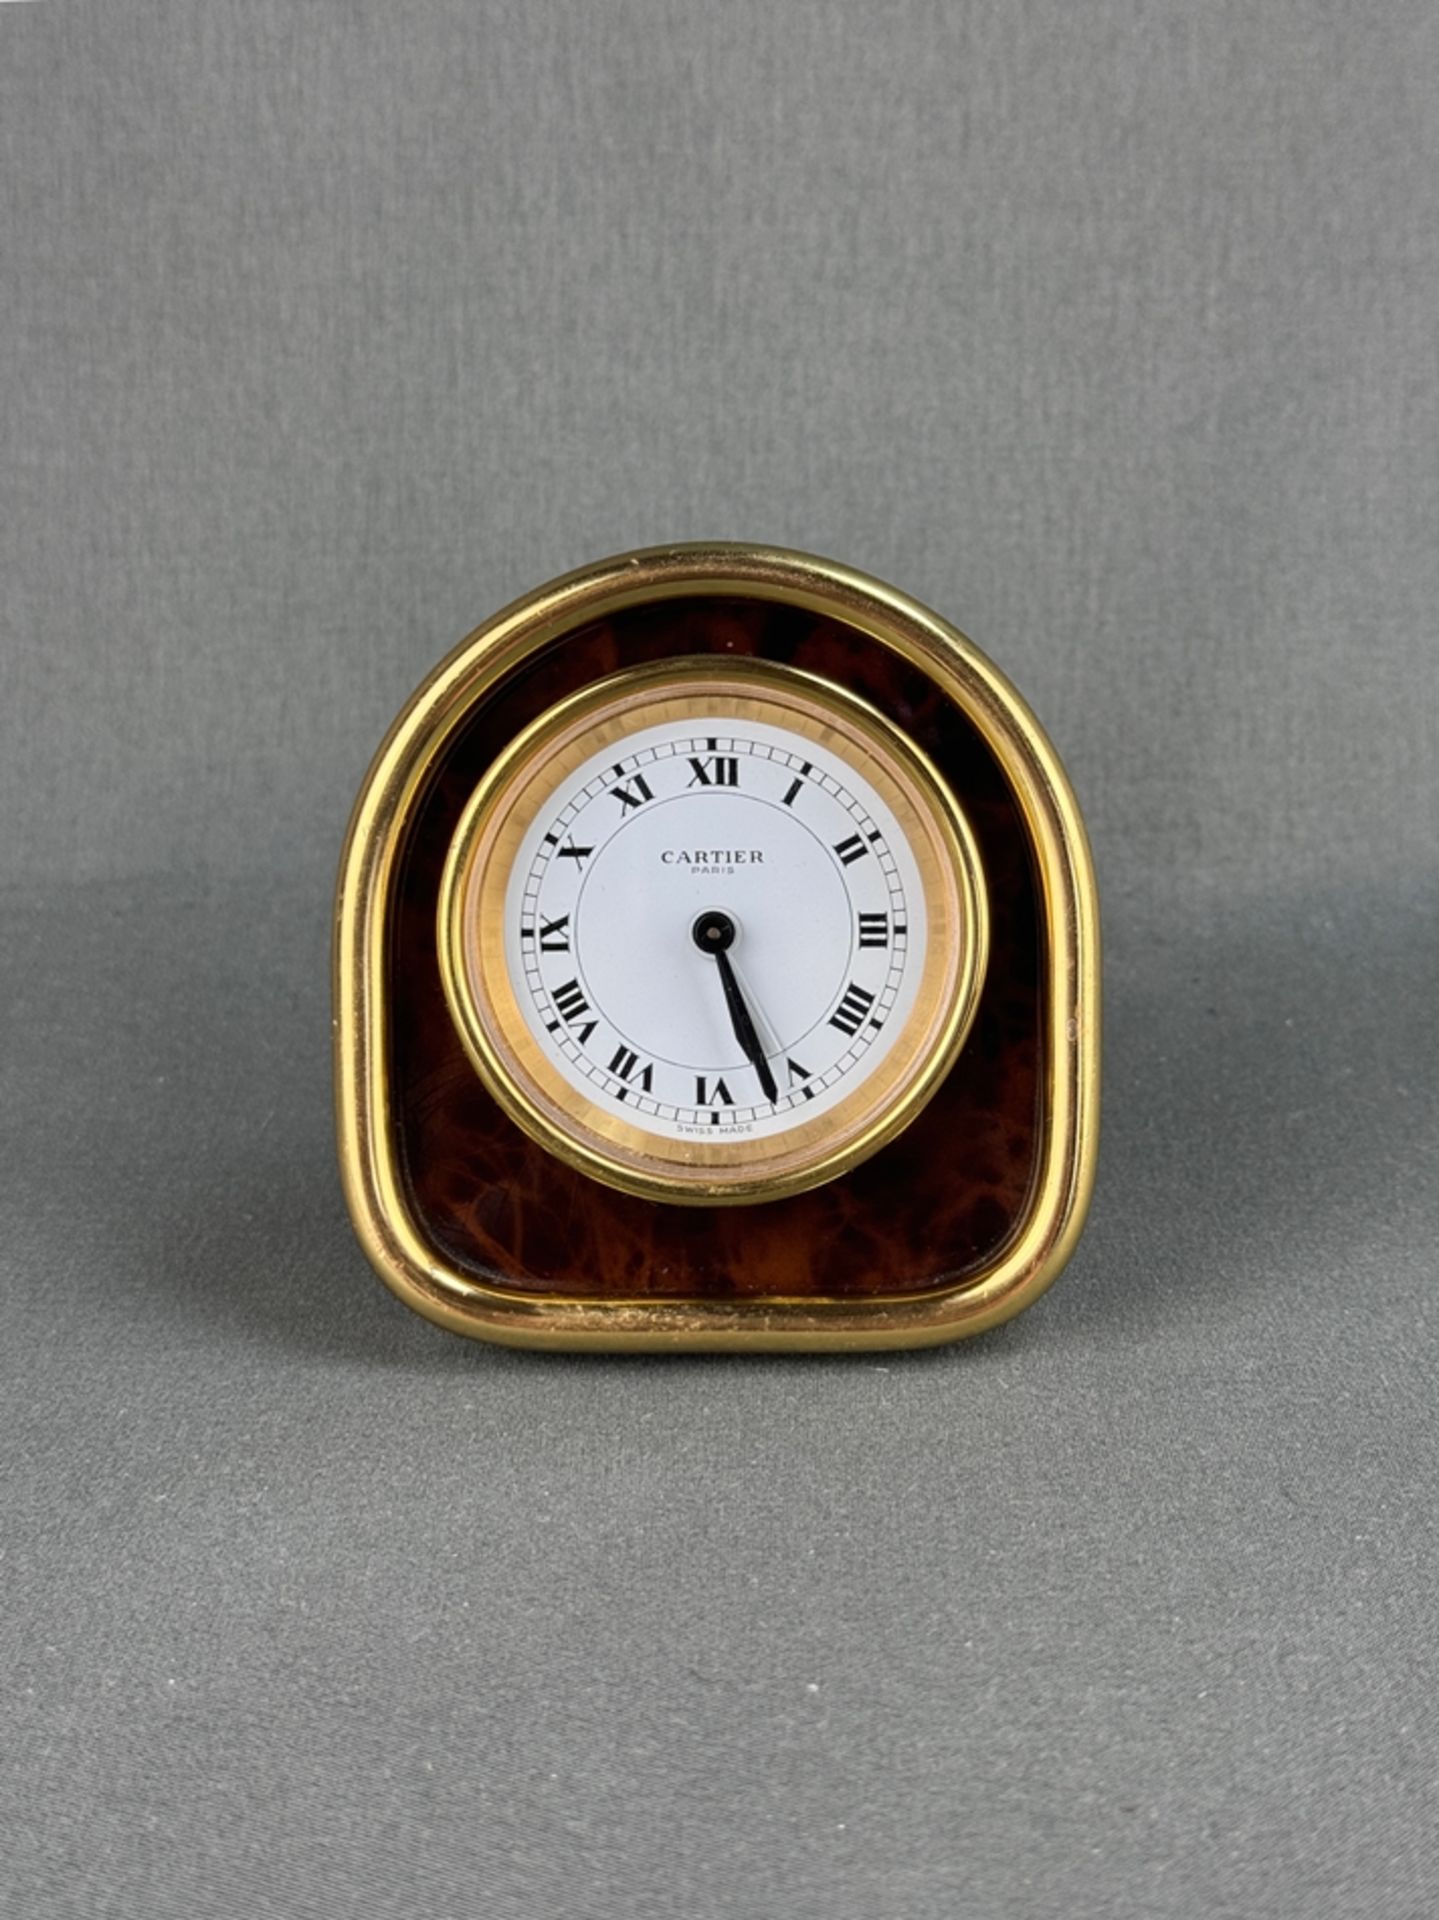 Table clock with alarm function, Cartier, Swiss made, brass case, manual winding, front and verso m